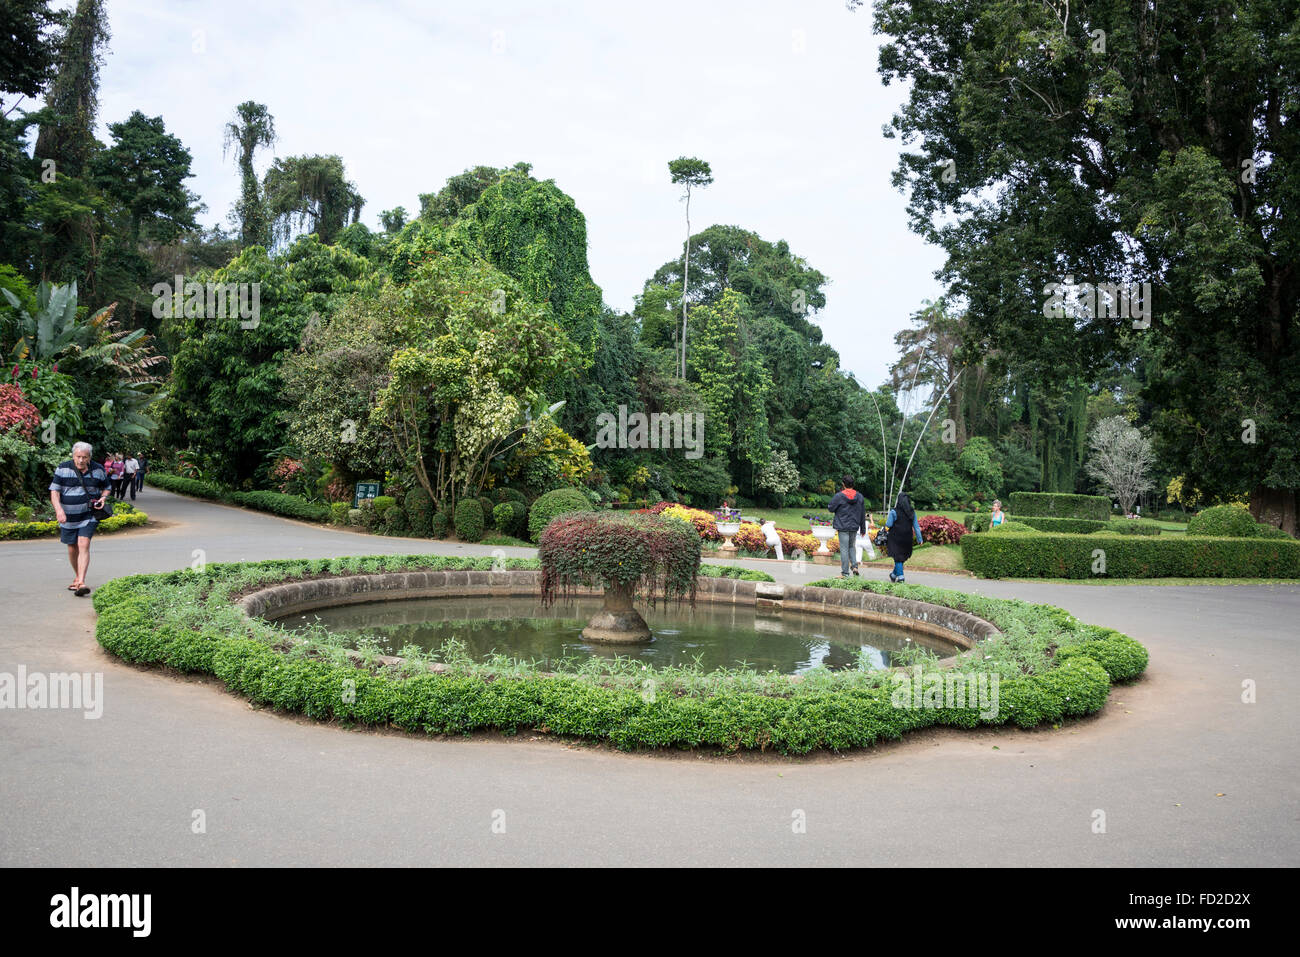 The Royal Botanic Gardens, Peradeniya are about 5.5 km from Kandy in the Central Province of Sri Lanka. Stock Photo